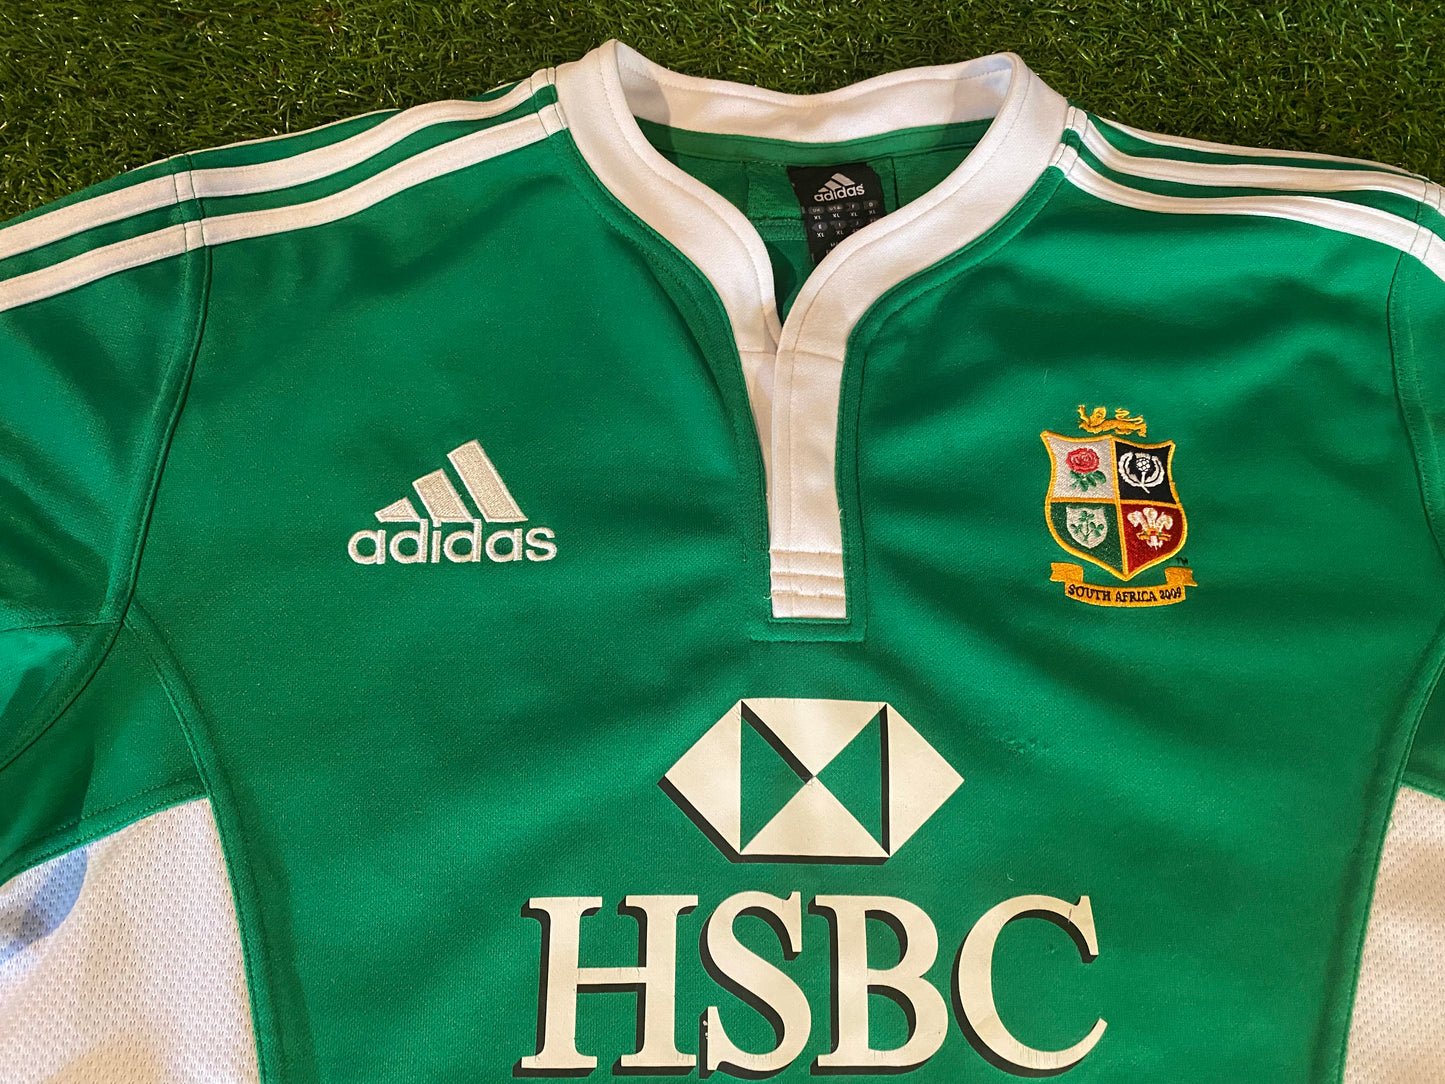 British & Irish Lions Rugby Union XL Extra Large Mans 2009 Adidas Tour of South Africa Jersey